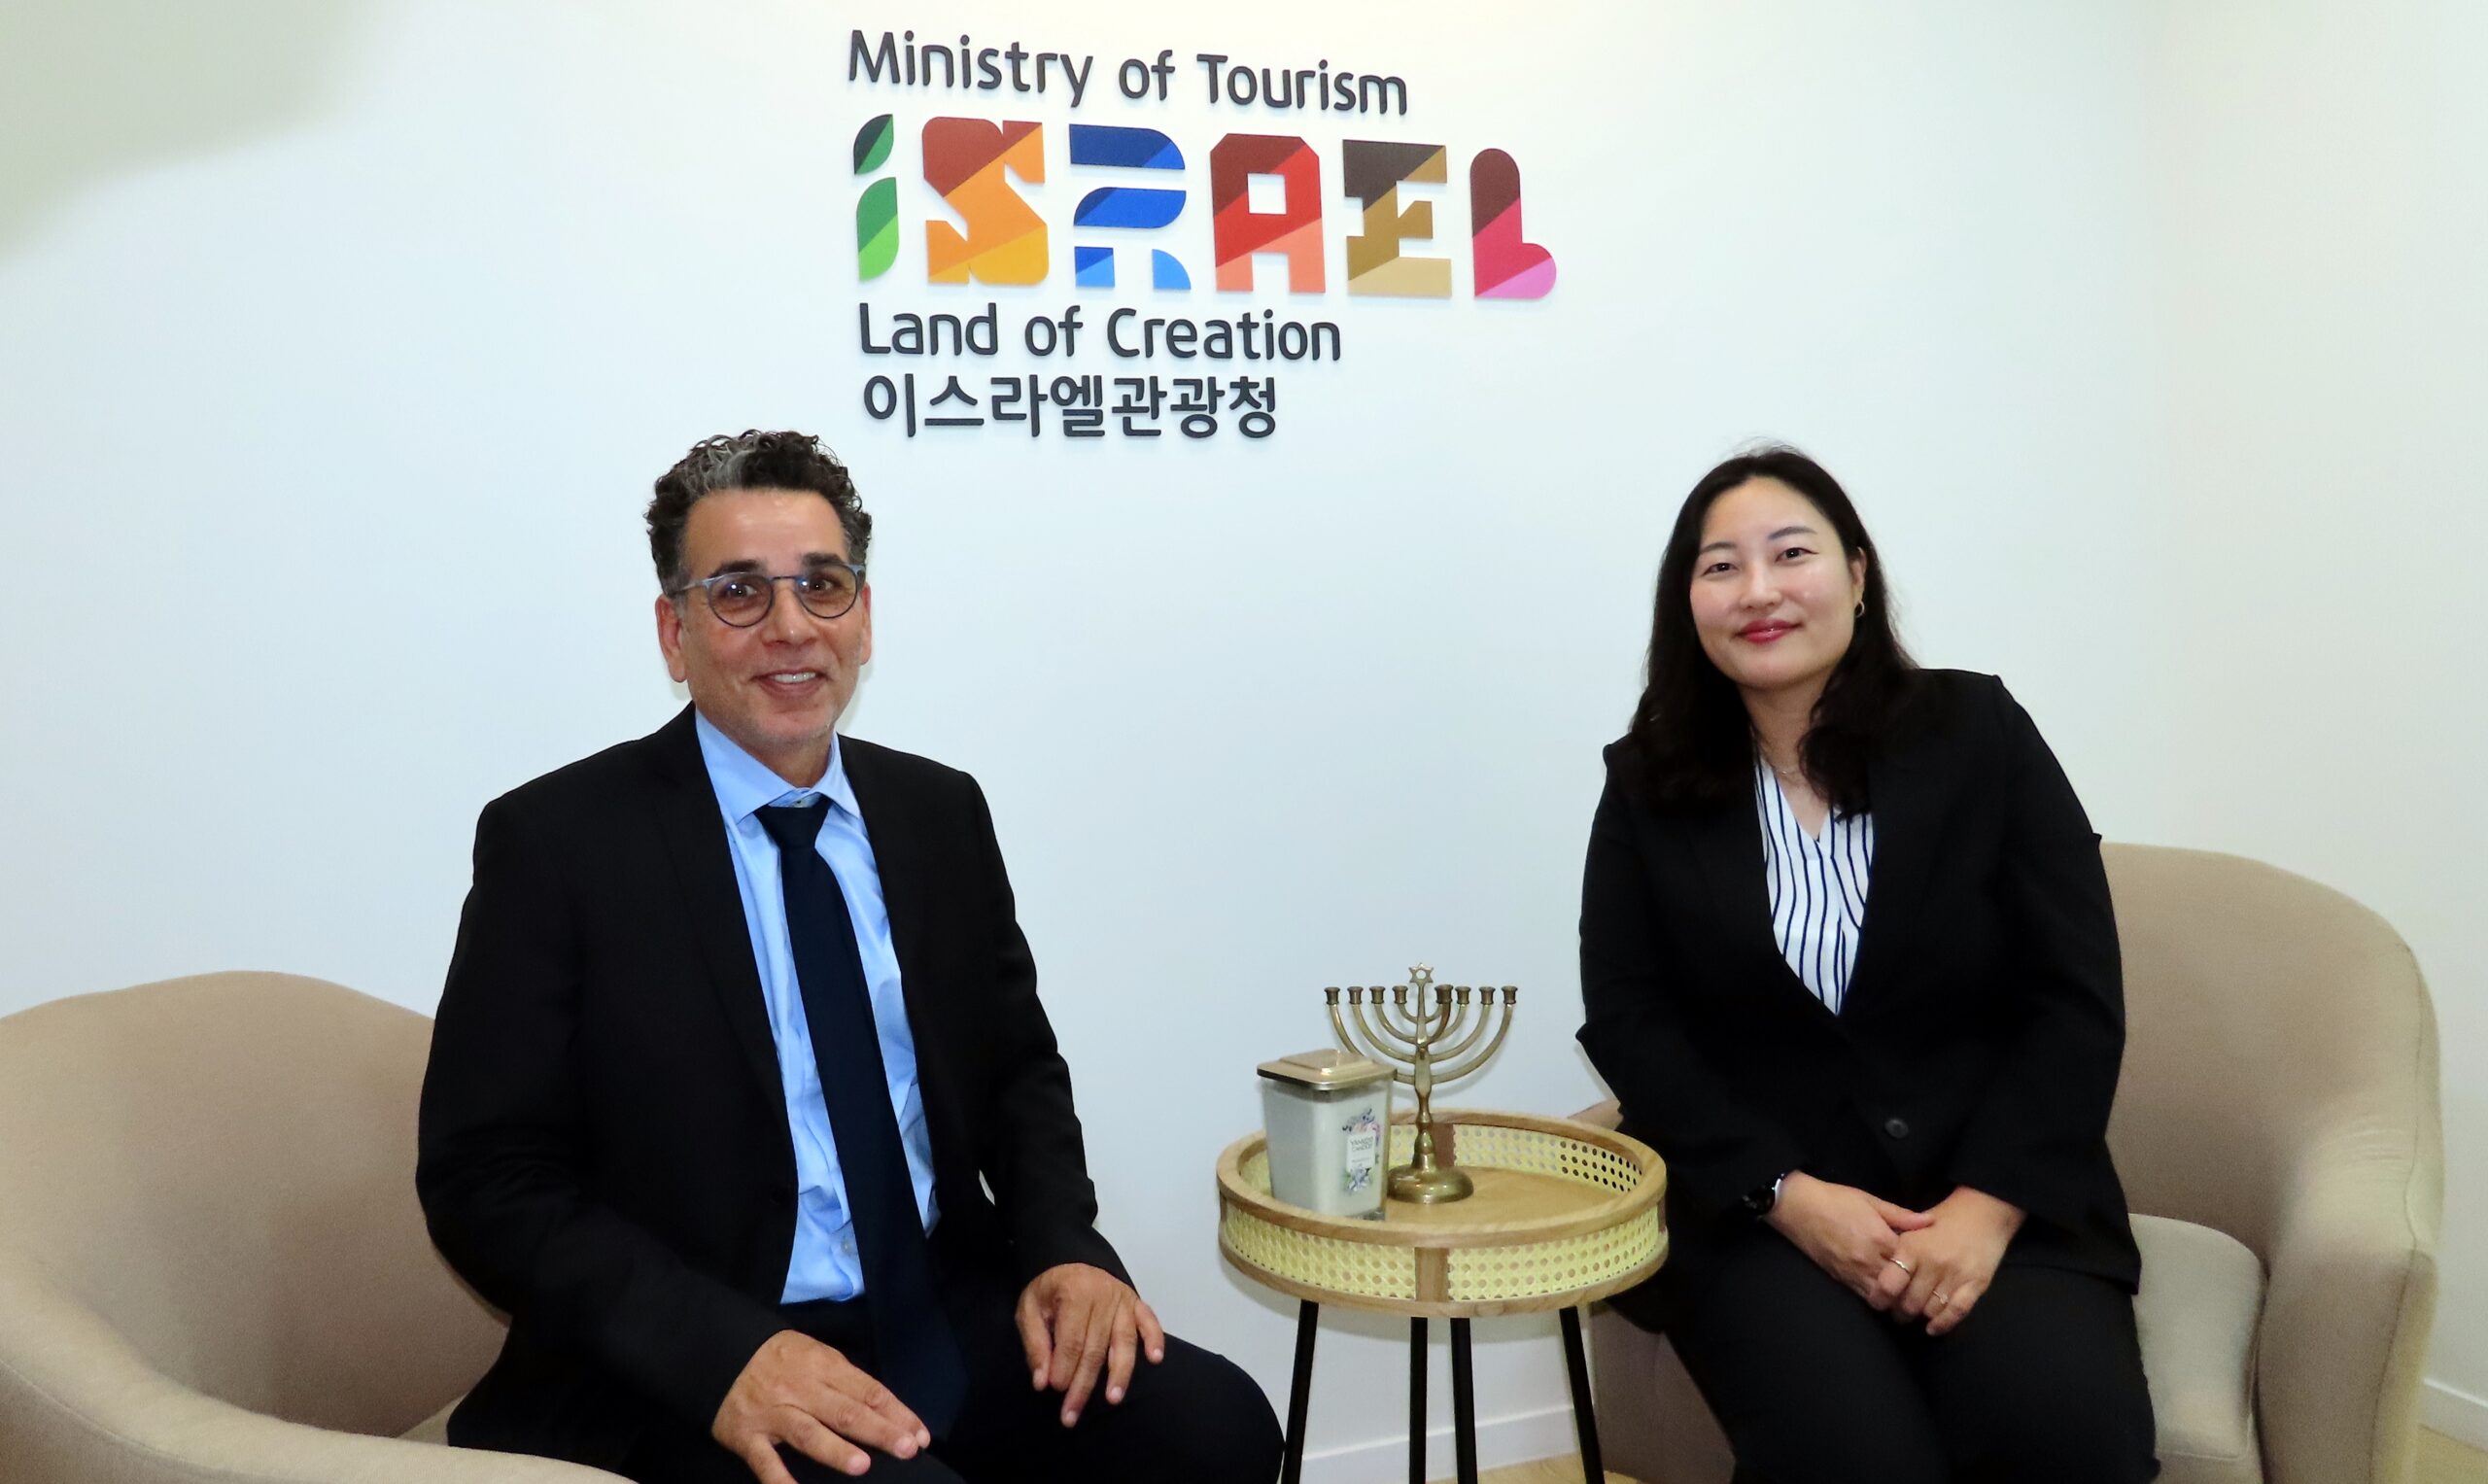 Israel Targets Asian and Korean Tourists for Tourism Expansion, Says Deputy Minister